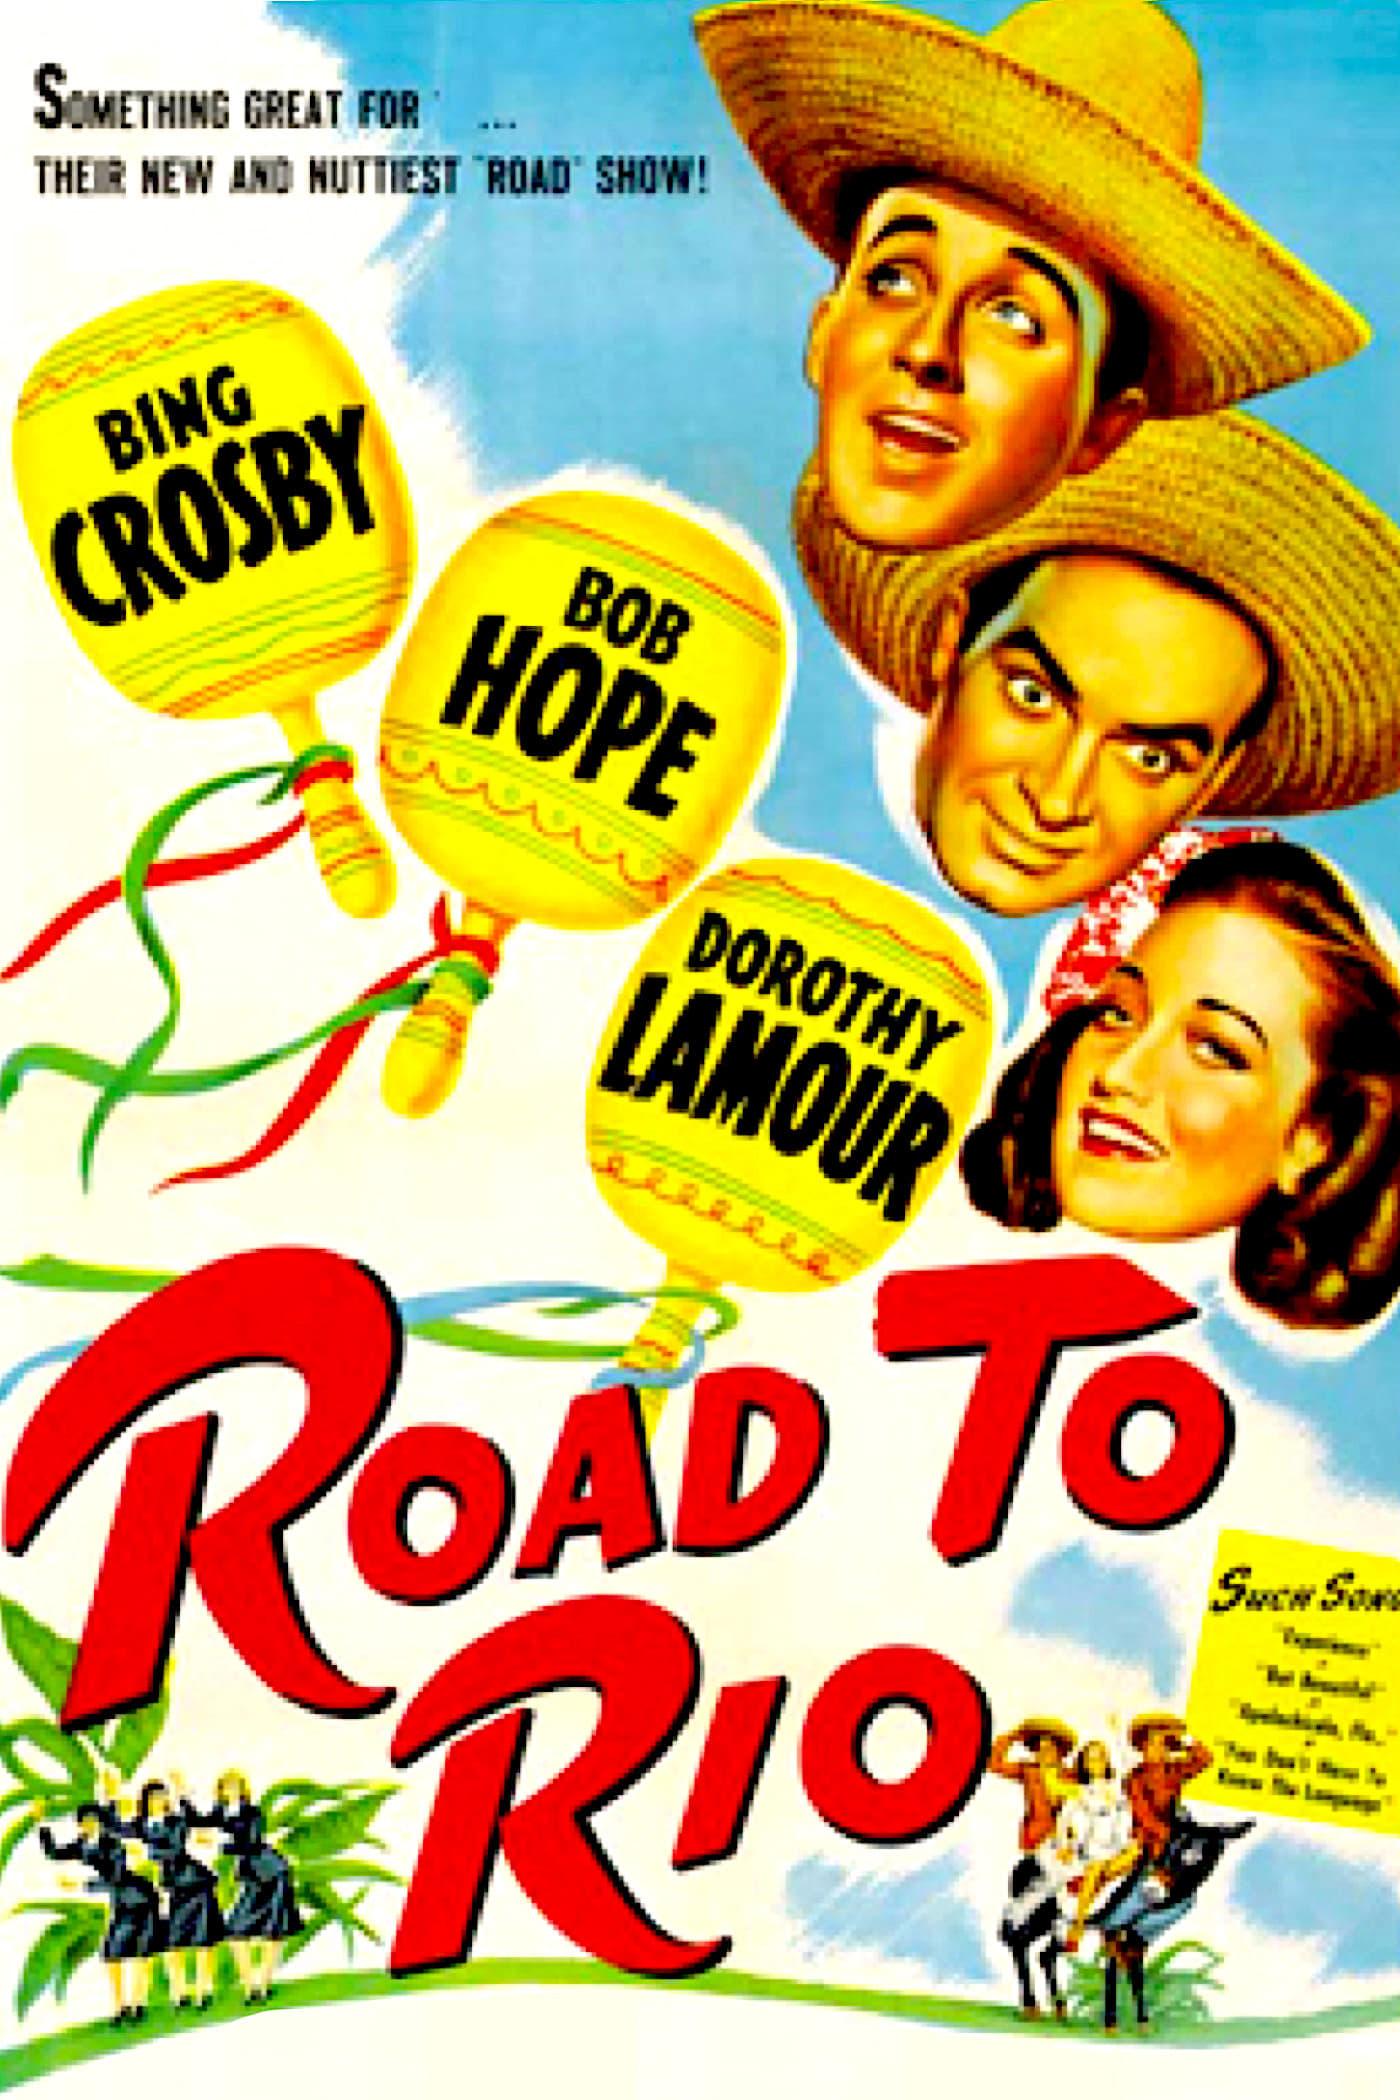 Road to Rio poster